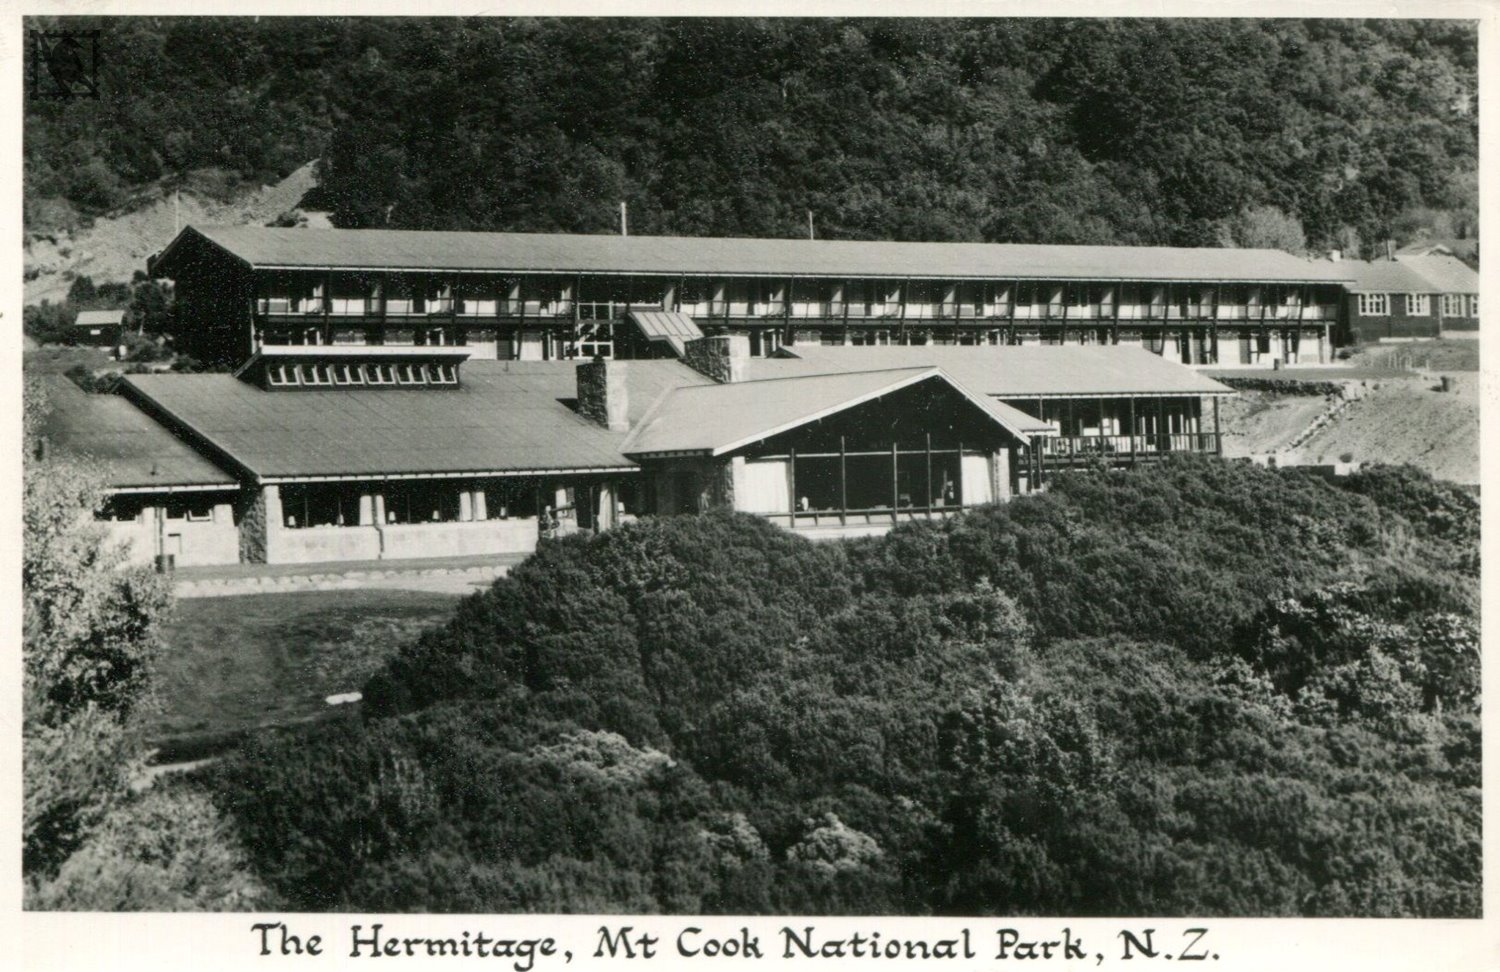 Mount Cook - The Hermitage